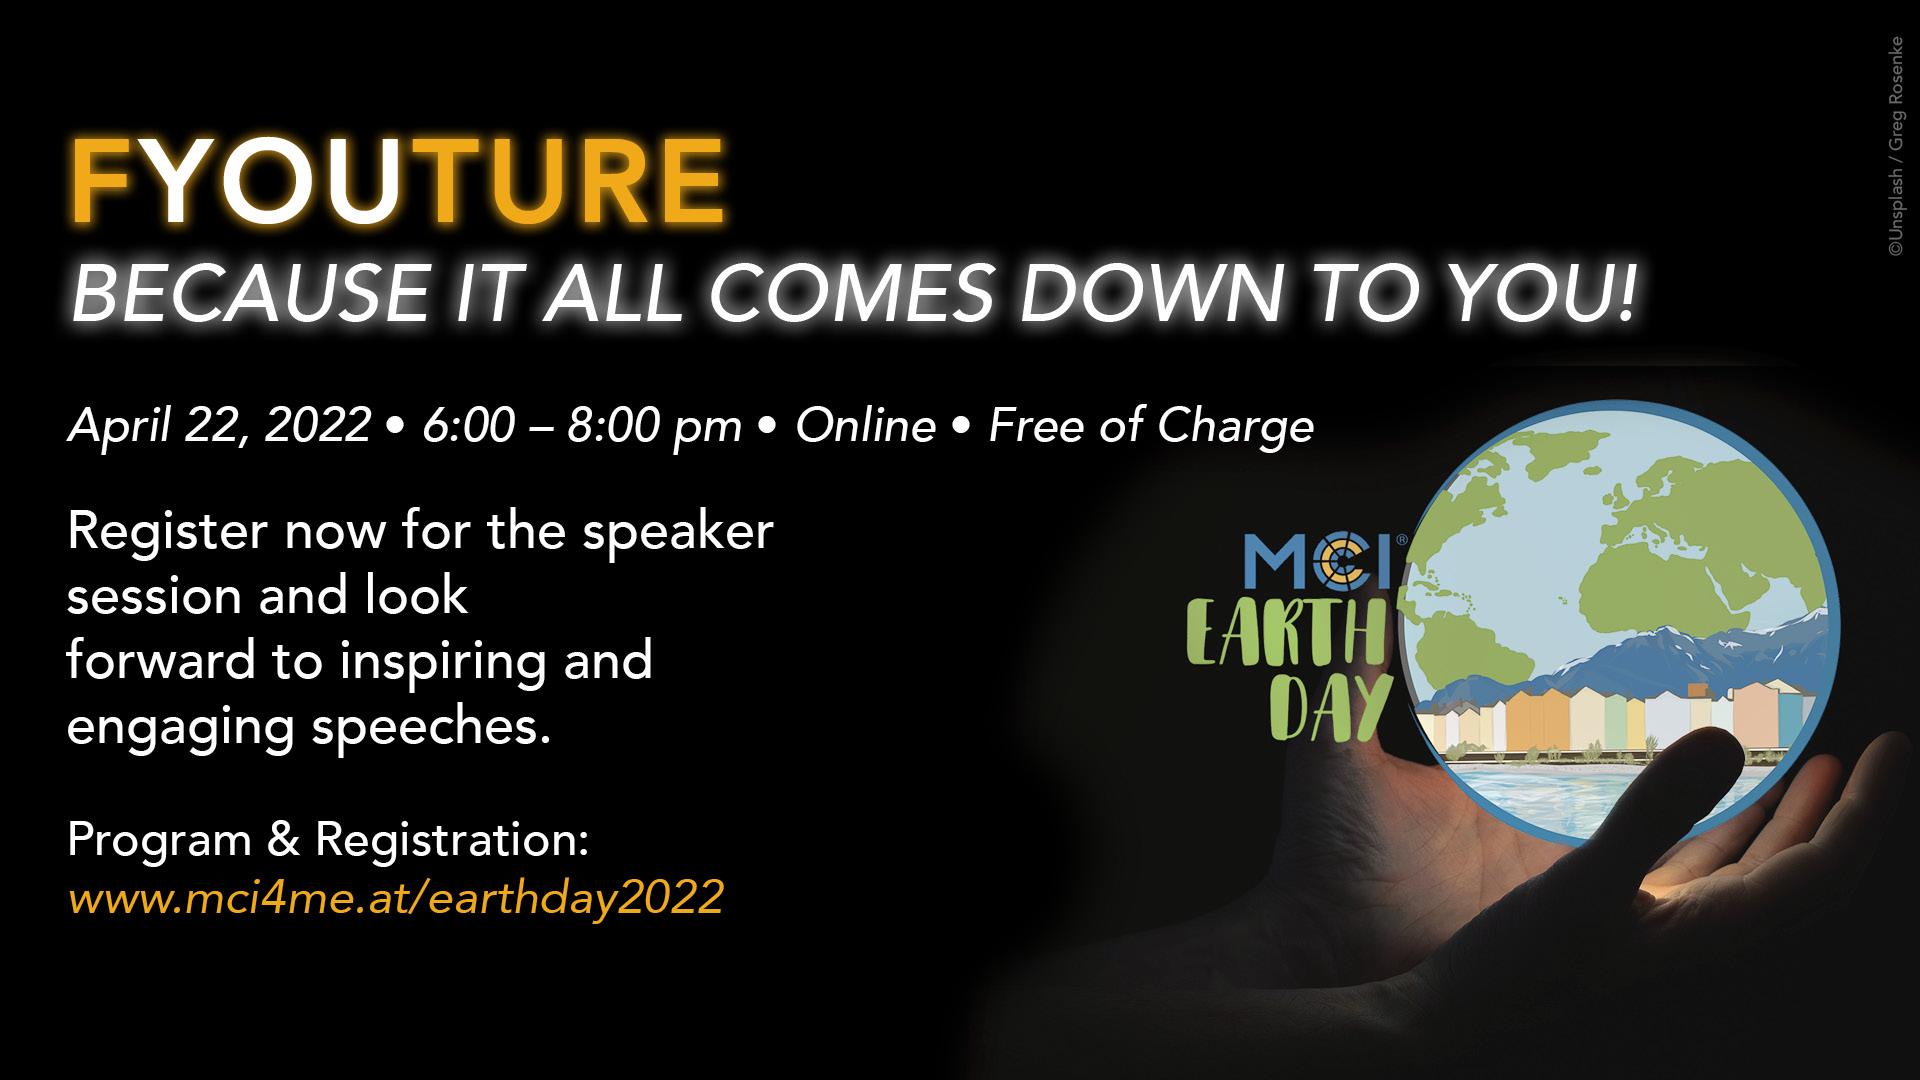 FYOUTURE - MCI EARTH DAY 2022 